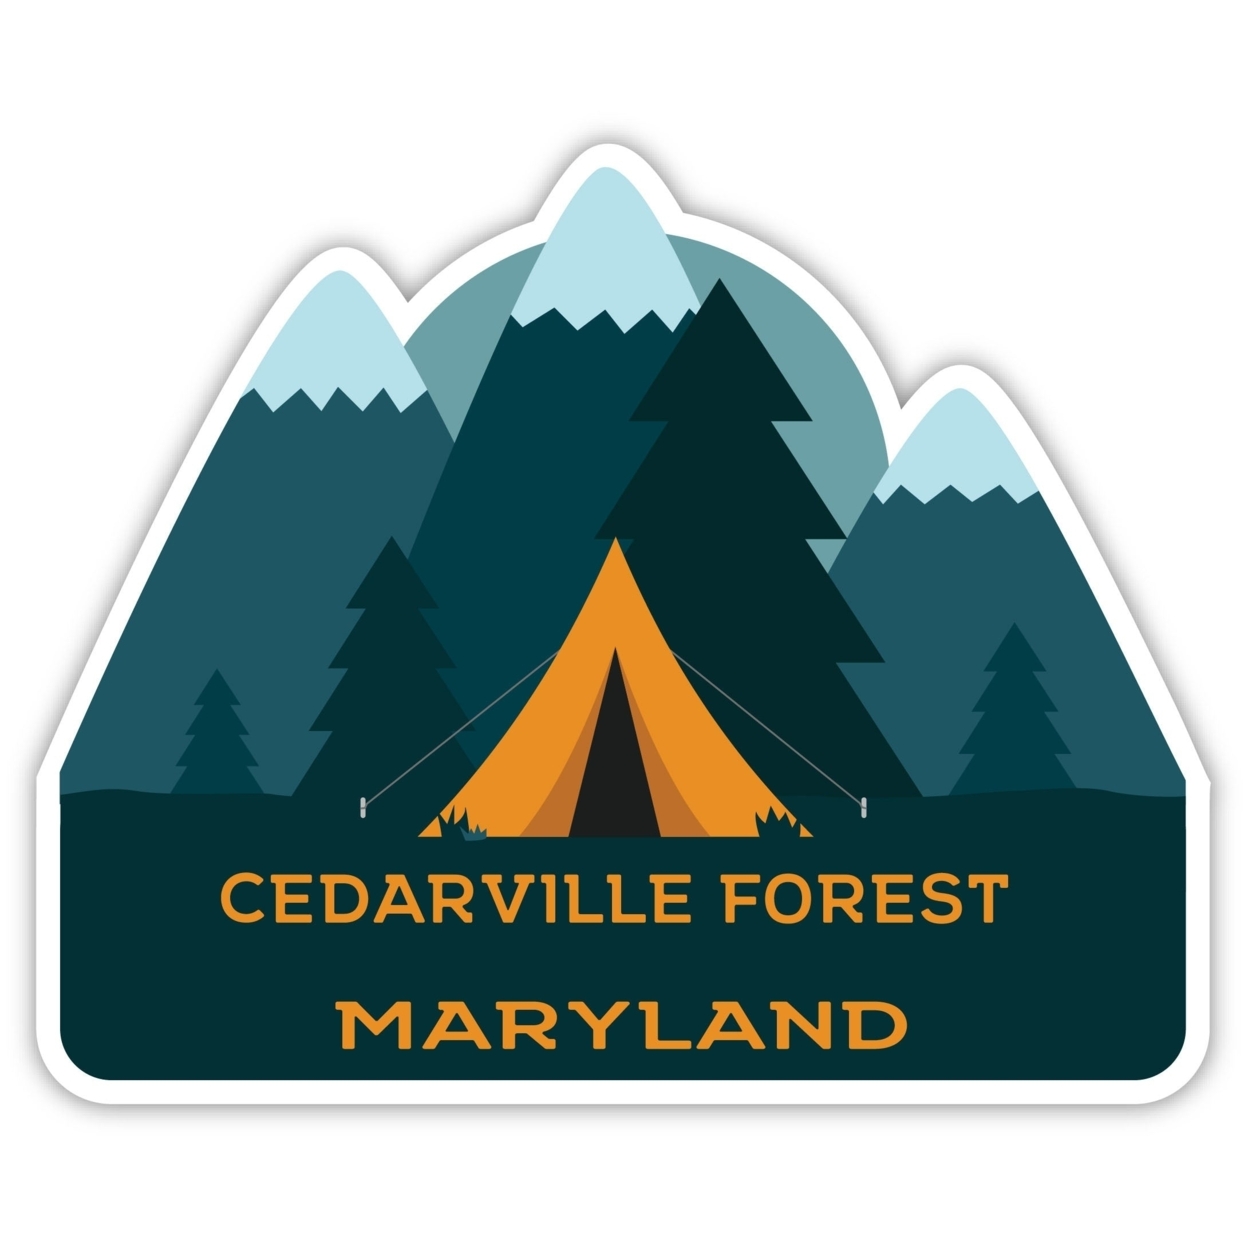 Cedarville Forest Maryland Souvenir Decorative Stickers (Choose Theme And Size) - Single Unit, 6-Inch, Tent